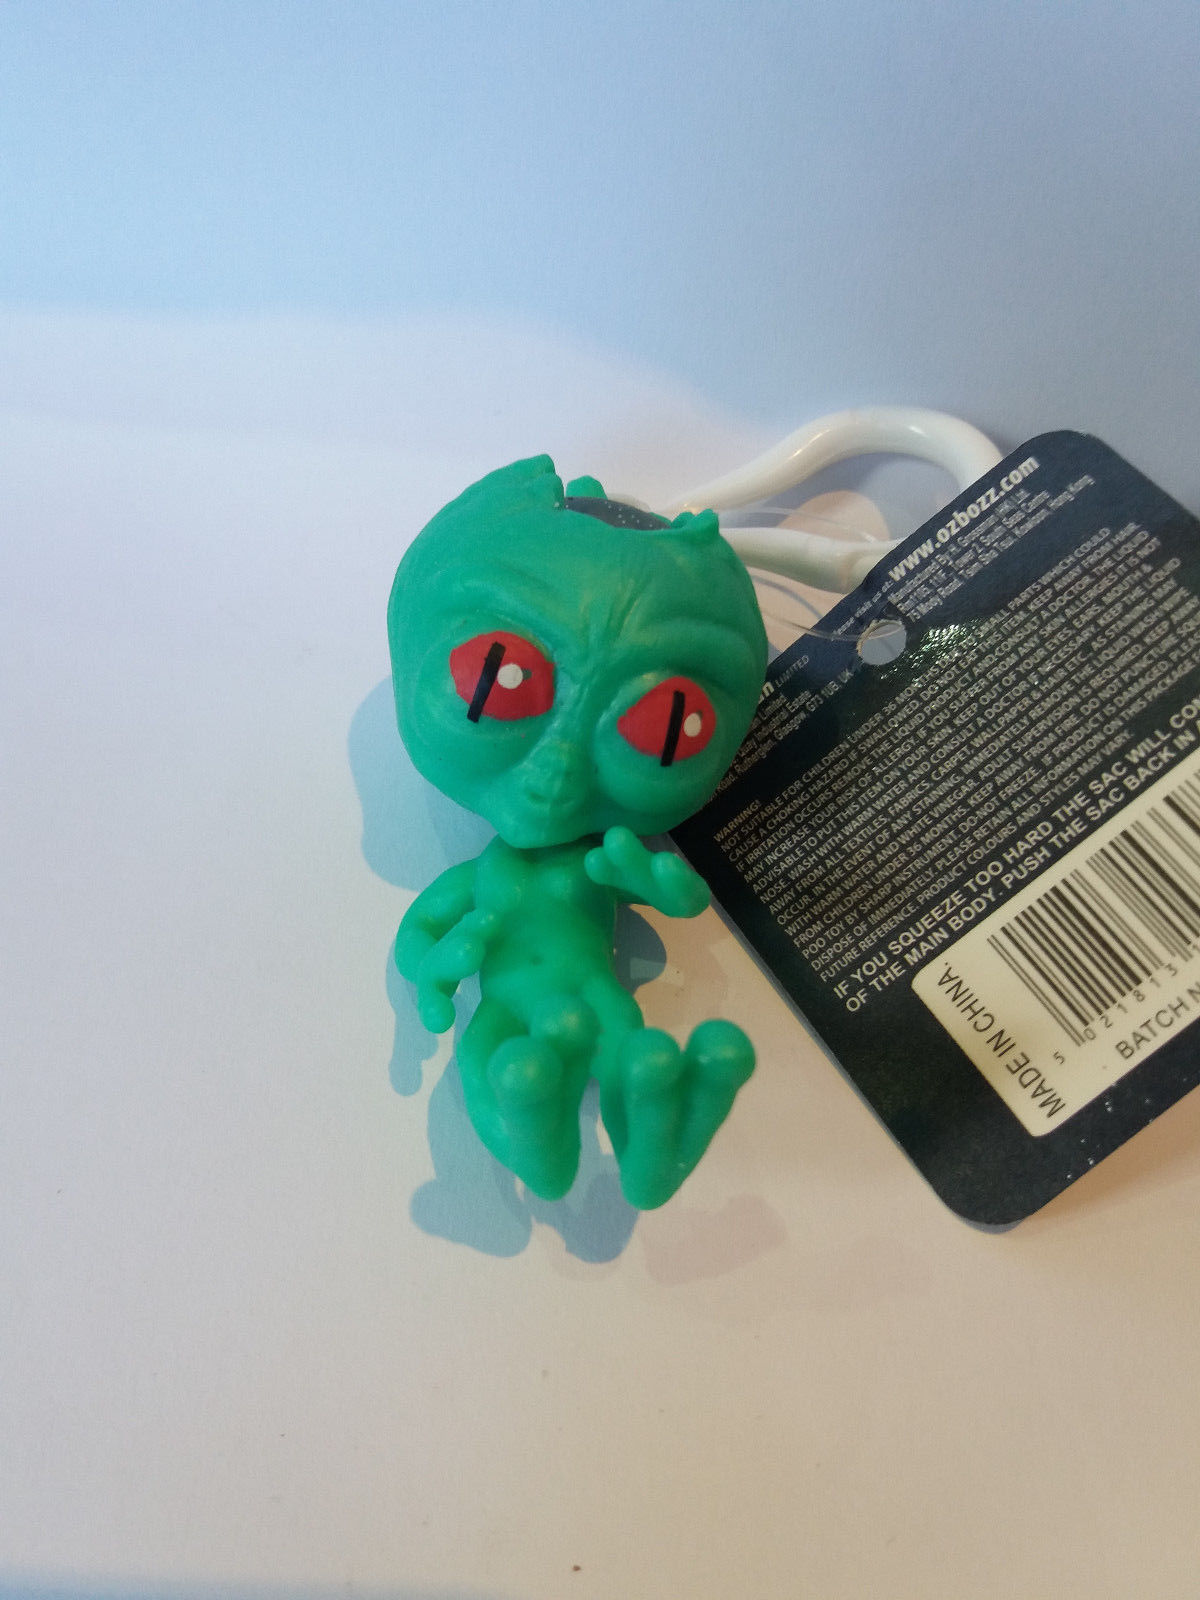 SQUEEZY ALIEN KEYRING NV377 KEY CHAIN STRESS RELIEF SPACE UFO SQUEEZE SQUIDGY 